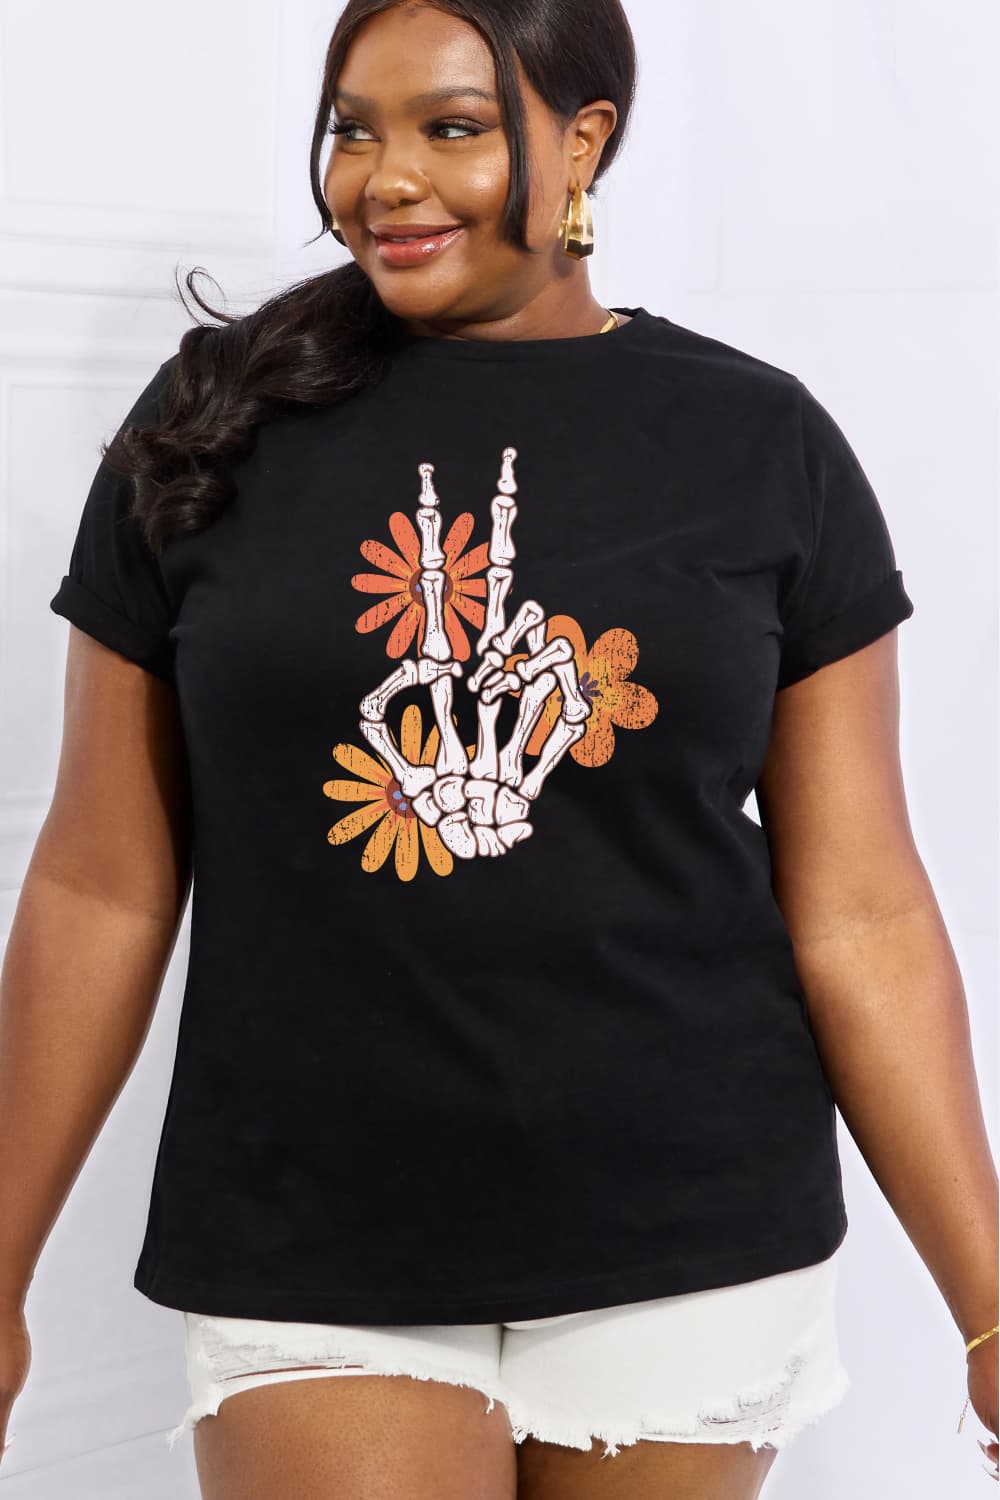 Full Size Skeleton Hand Graphic Cotton Tee - T-Shirts - Shirts & Tops - 3 - 2024